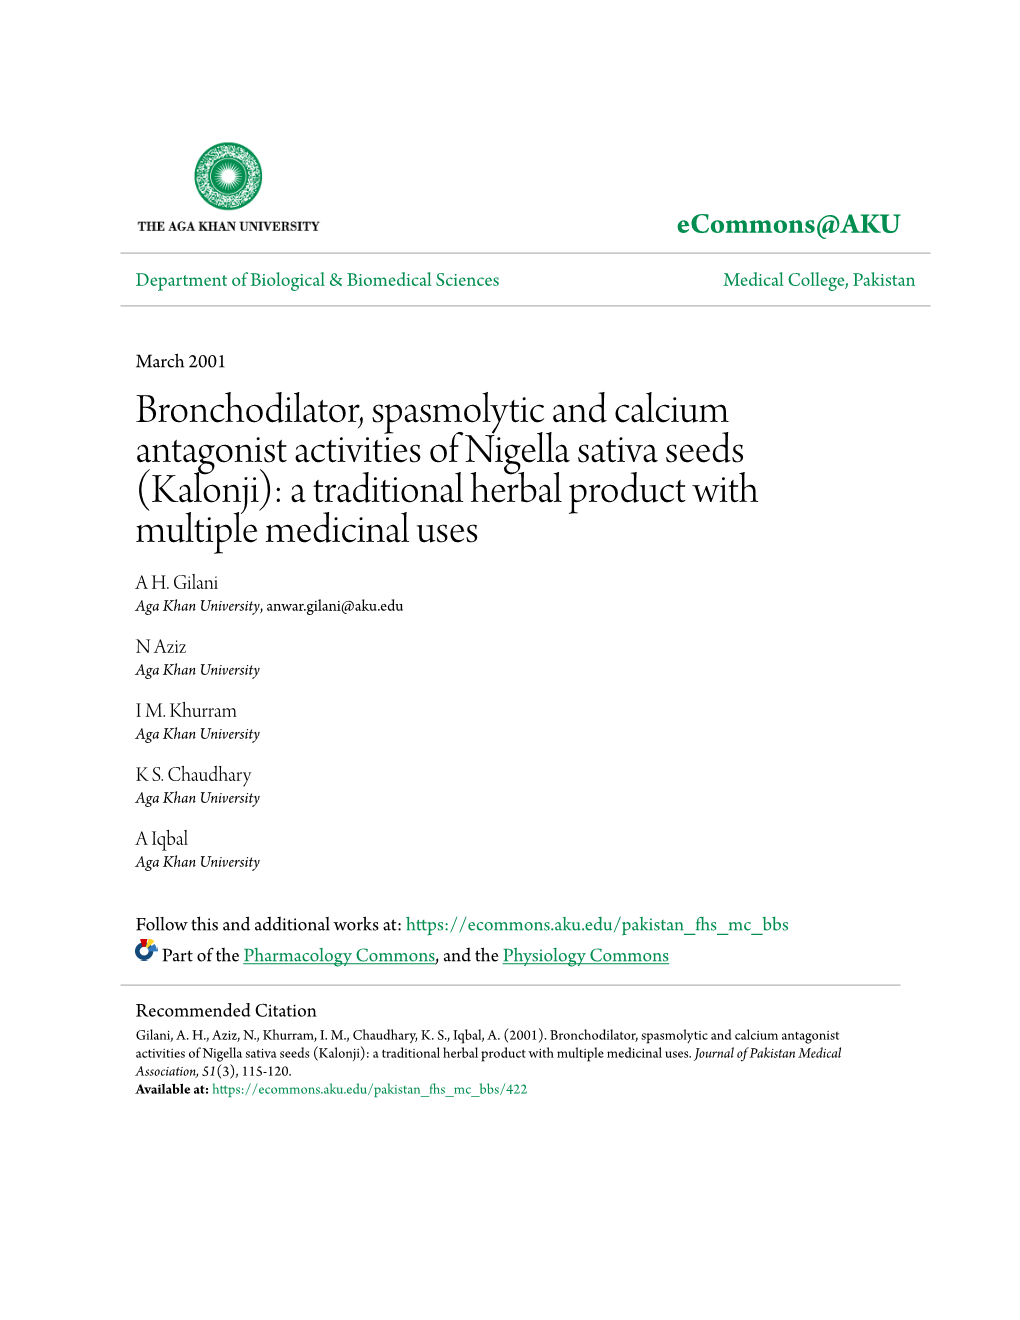 Bronchodilator, Spasmolytic and Calcium Antagonist Activities of Nigella Sativa Seeds (Kalonji): a Traditional Herbal Product with Multiple Medicinal Uses a H